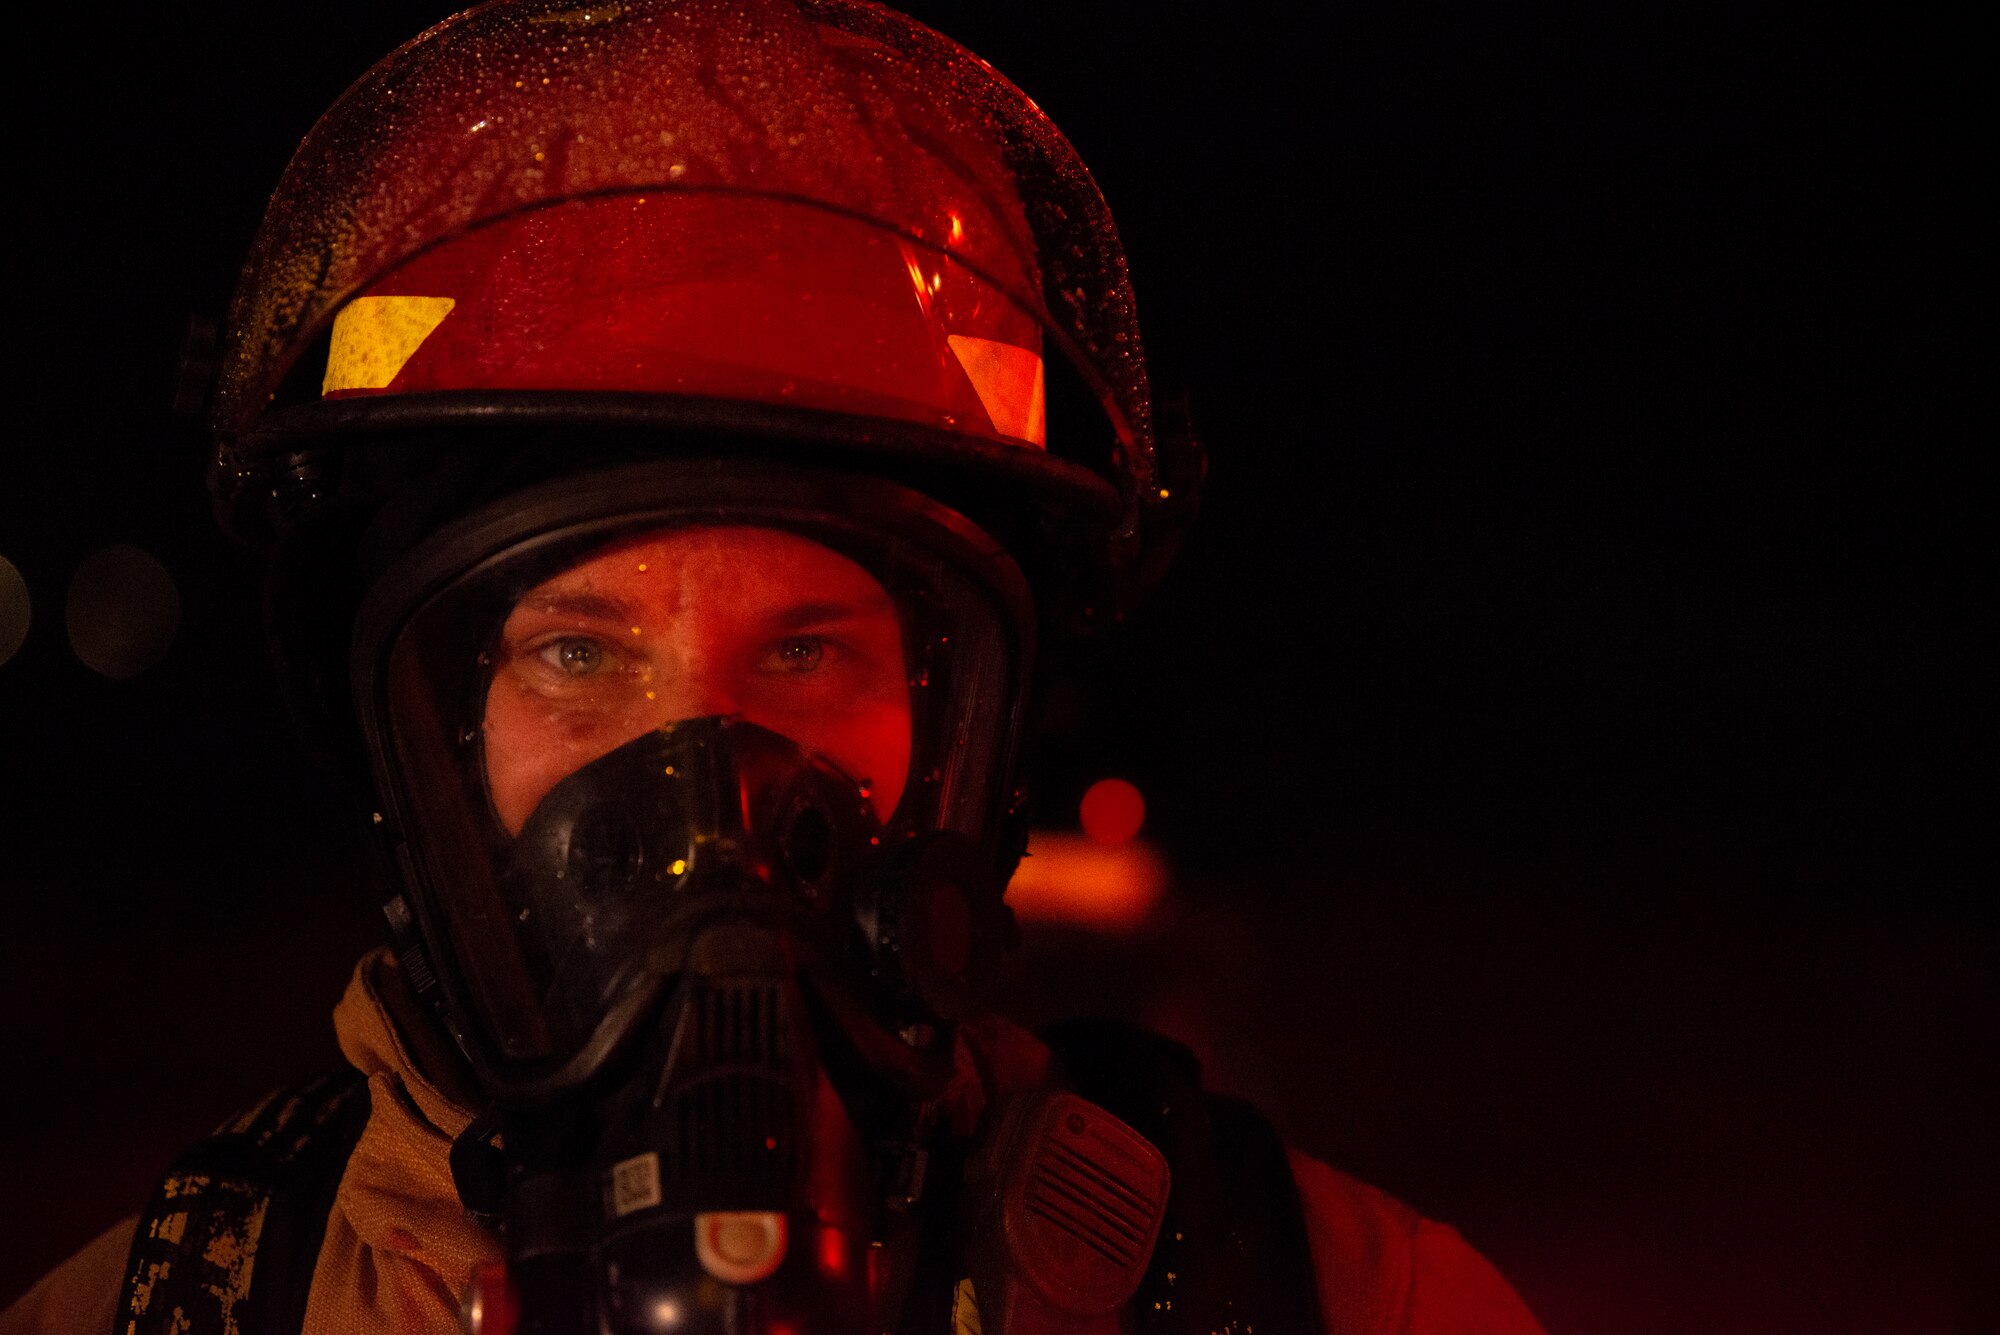 Staff Sgt. Kami Clarkson, 379th Expeditionary Civil Engineer Squadron lead firefighter, participates in live-fire training exercise August 10, 2021, at Al Udeid Air Base, Qatar.